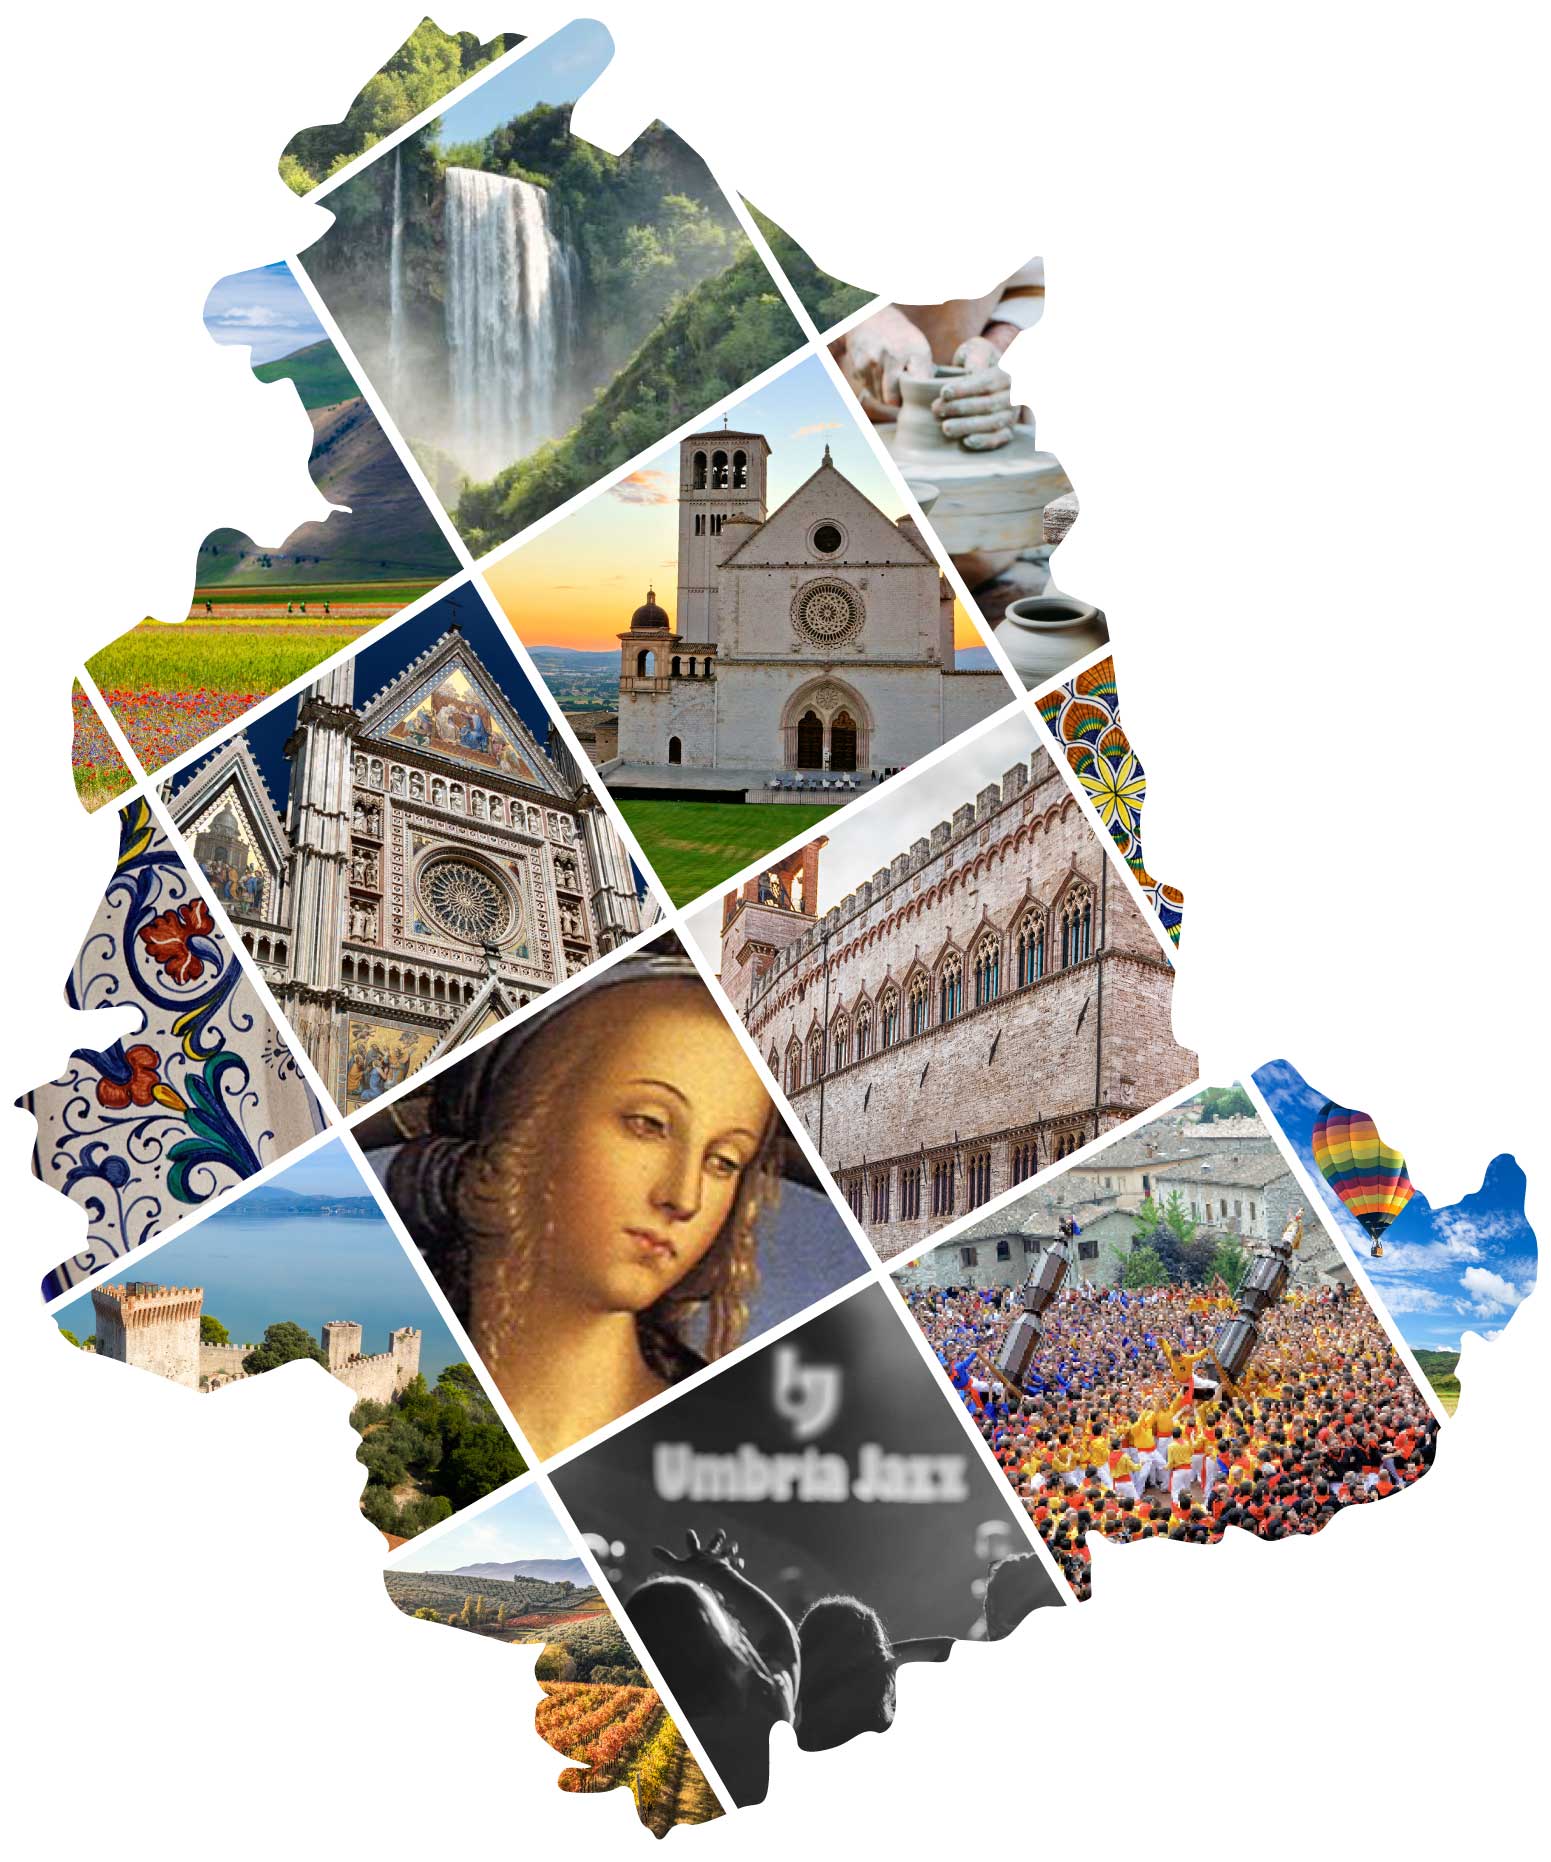 Umbria, the Green Heart of Italy - Umbriafiere. A mosaic of nature, history, art, culture, craftsmanship, folklore